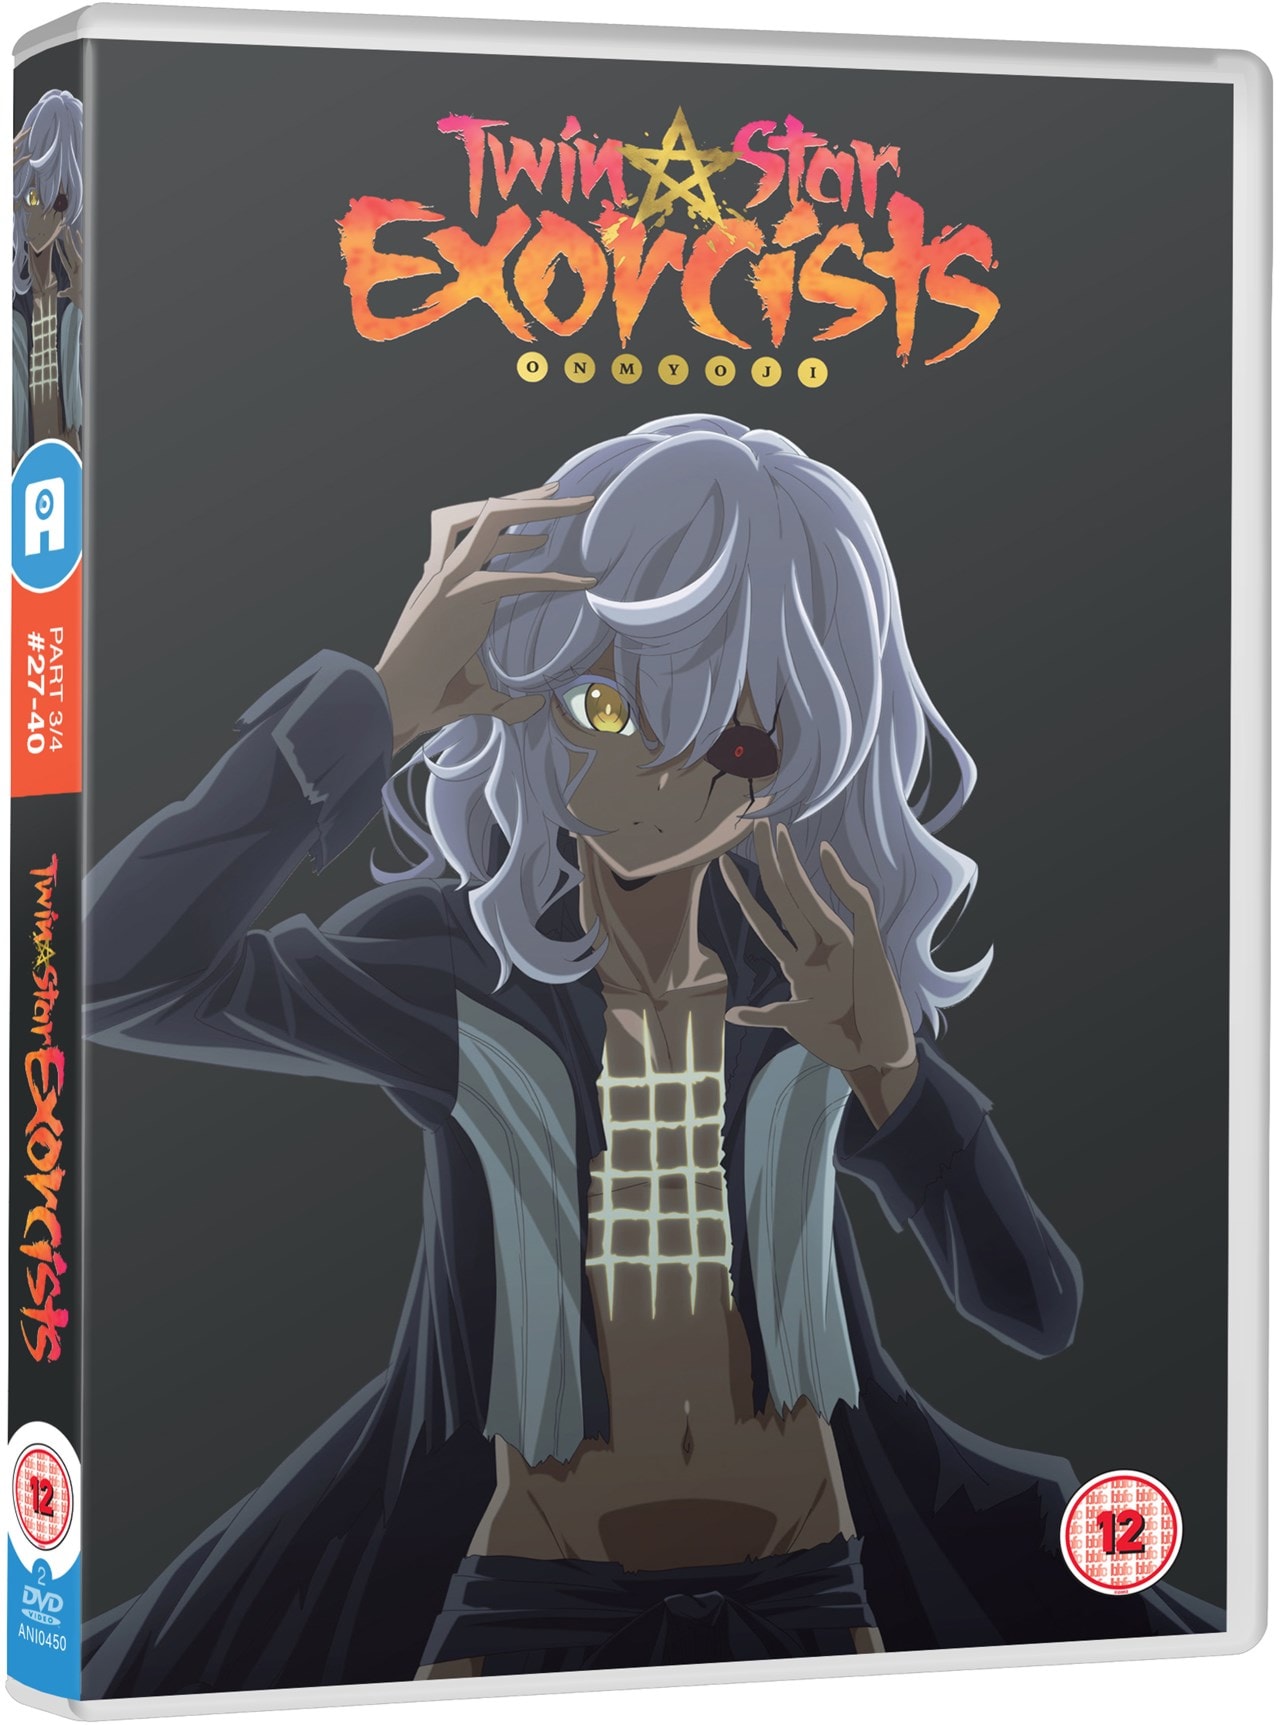 Twin Star Exorcists: Part 3 | DVD | Free shipping over £20 | HMV Store